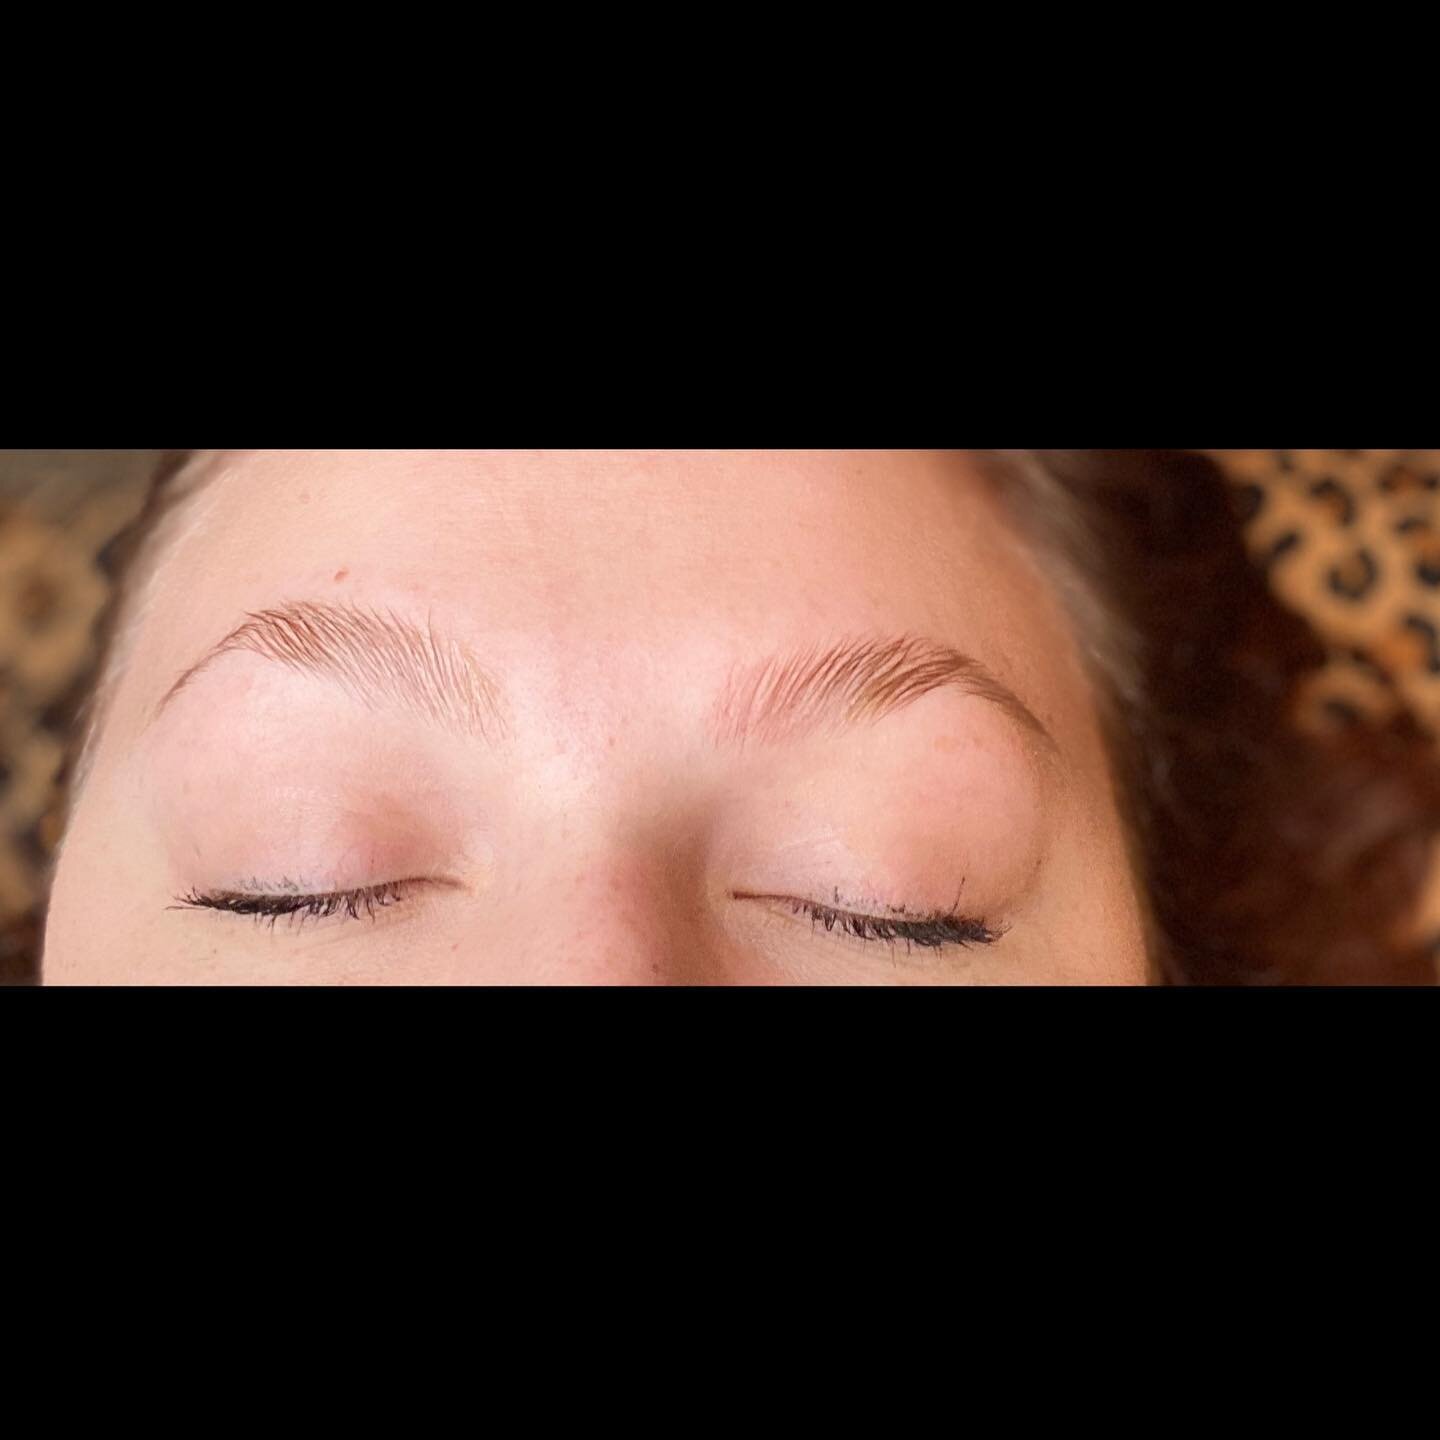 ✨Tomorrow, 10/2, is National Brow Day!!✨
.
Come celebrate with us with some amazing deals we have for you! We are offering you eyebrow waxes for $10, saving you $7 and eyebrow tinting for $15, saving you $5. 
.
We are pleased to now offer Brow Lamina